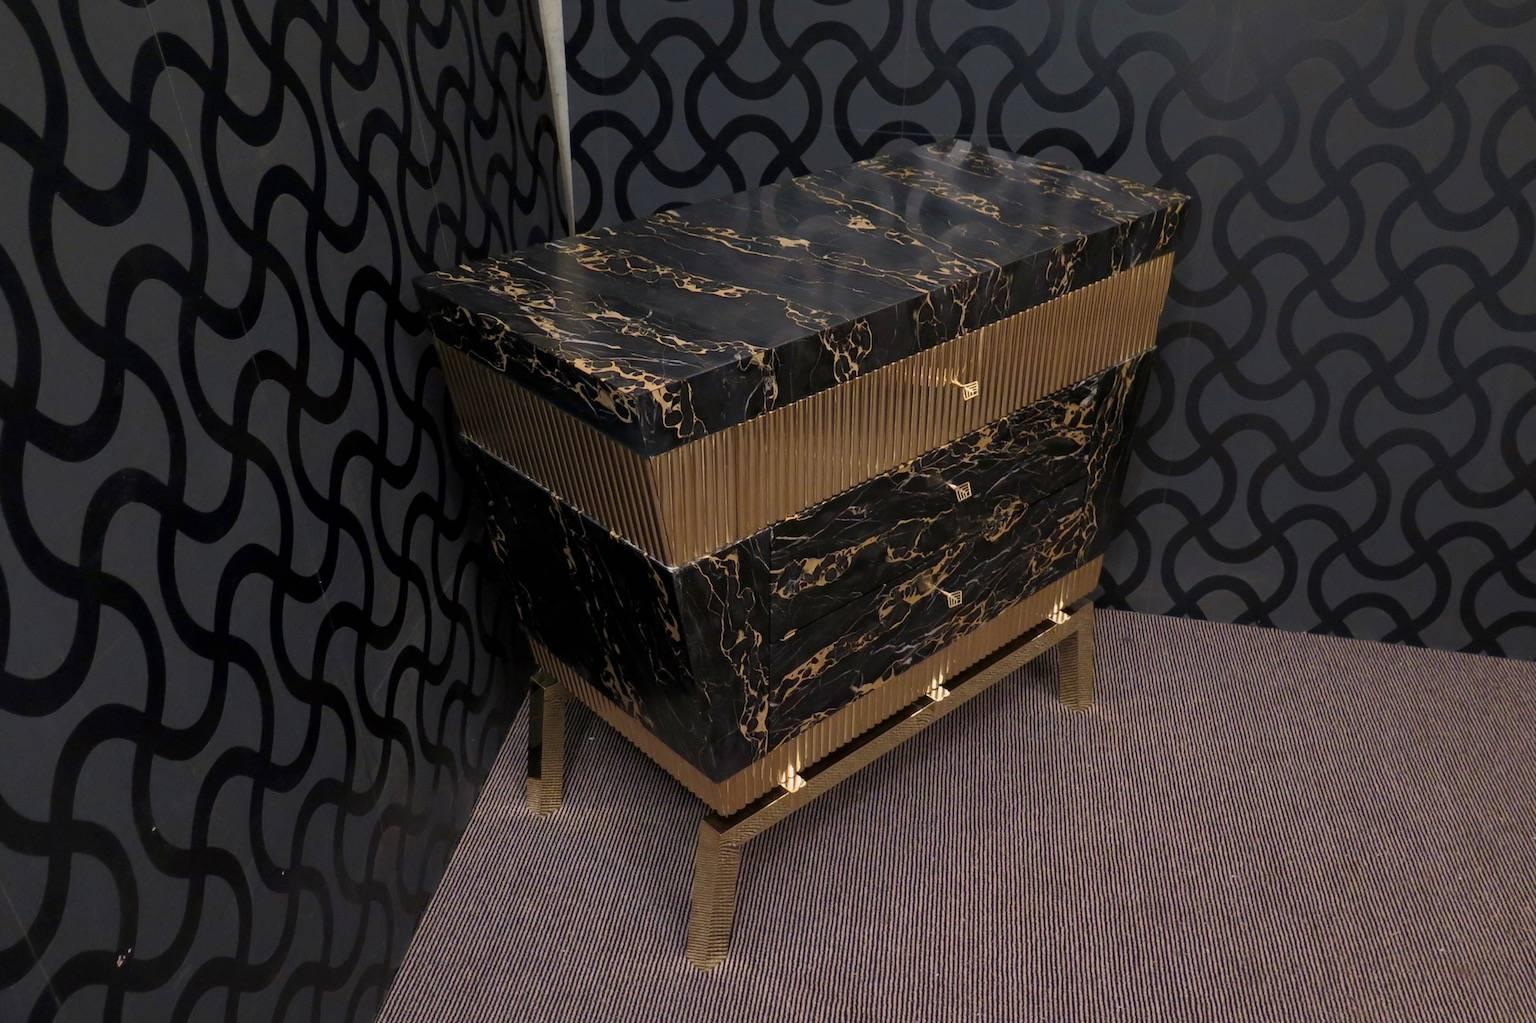 A magnificent commode created for the Hannauroma store. This commode has a very luxurious appearance, due the use of not common materials. Portoro marble and brass.

A new study design by 